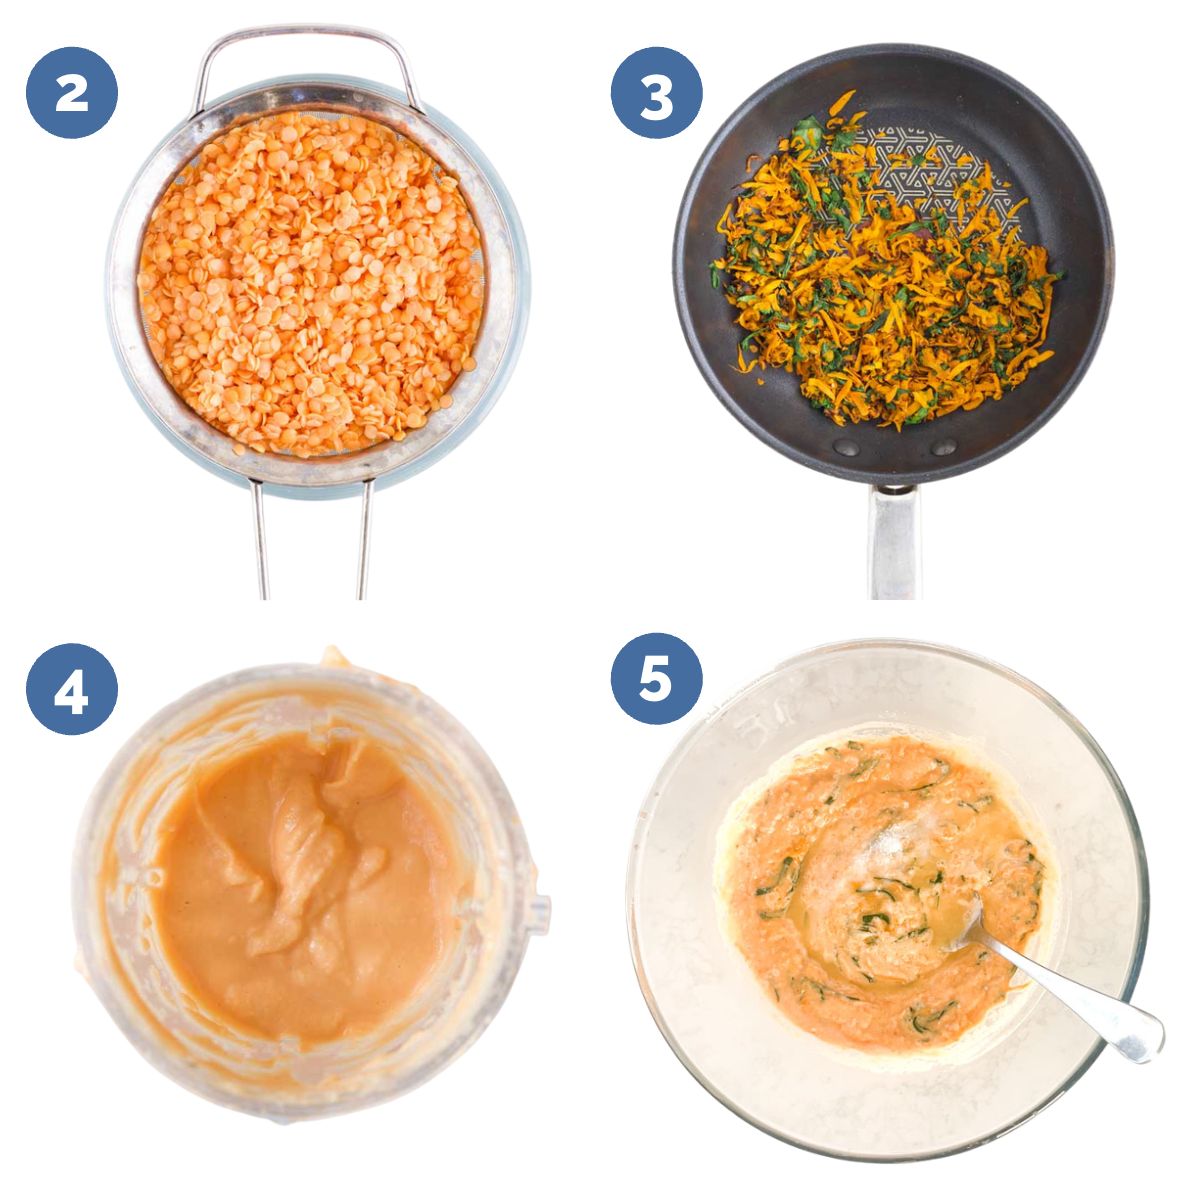 Collage of 4 Pictures Showing How to Make Lentil Pancakes. 1) Lentils Drained in Sieve 2) Vegetables Sauted in Pan 3)Lentils Pureed 4) Pureed Lentil Mixed with Vegetables.